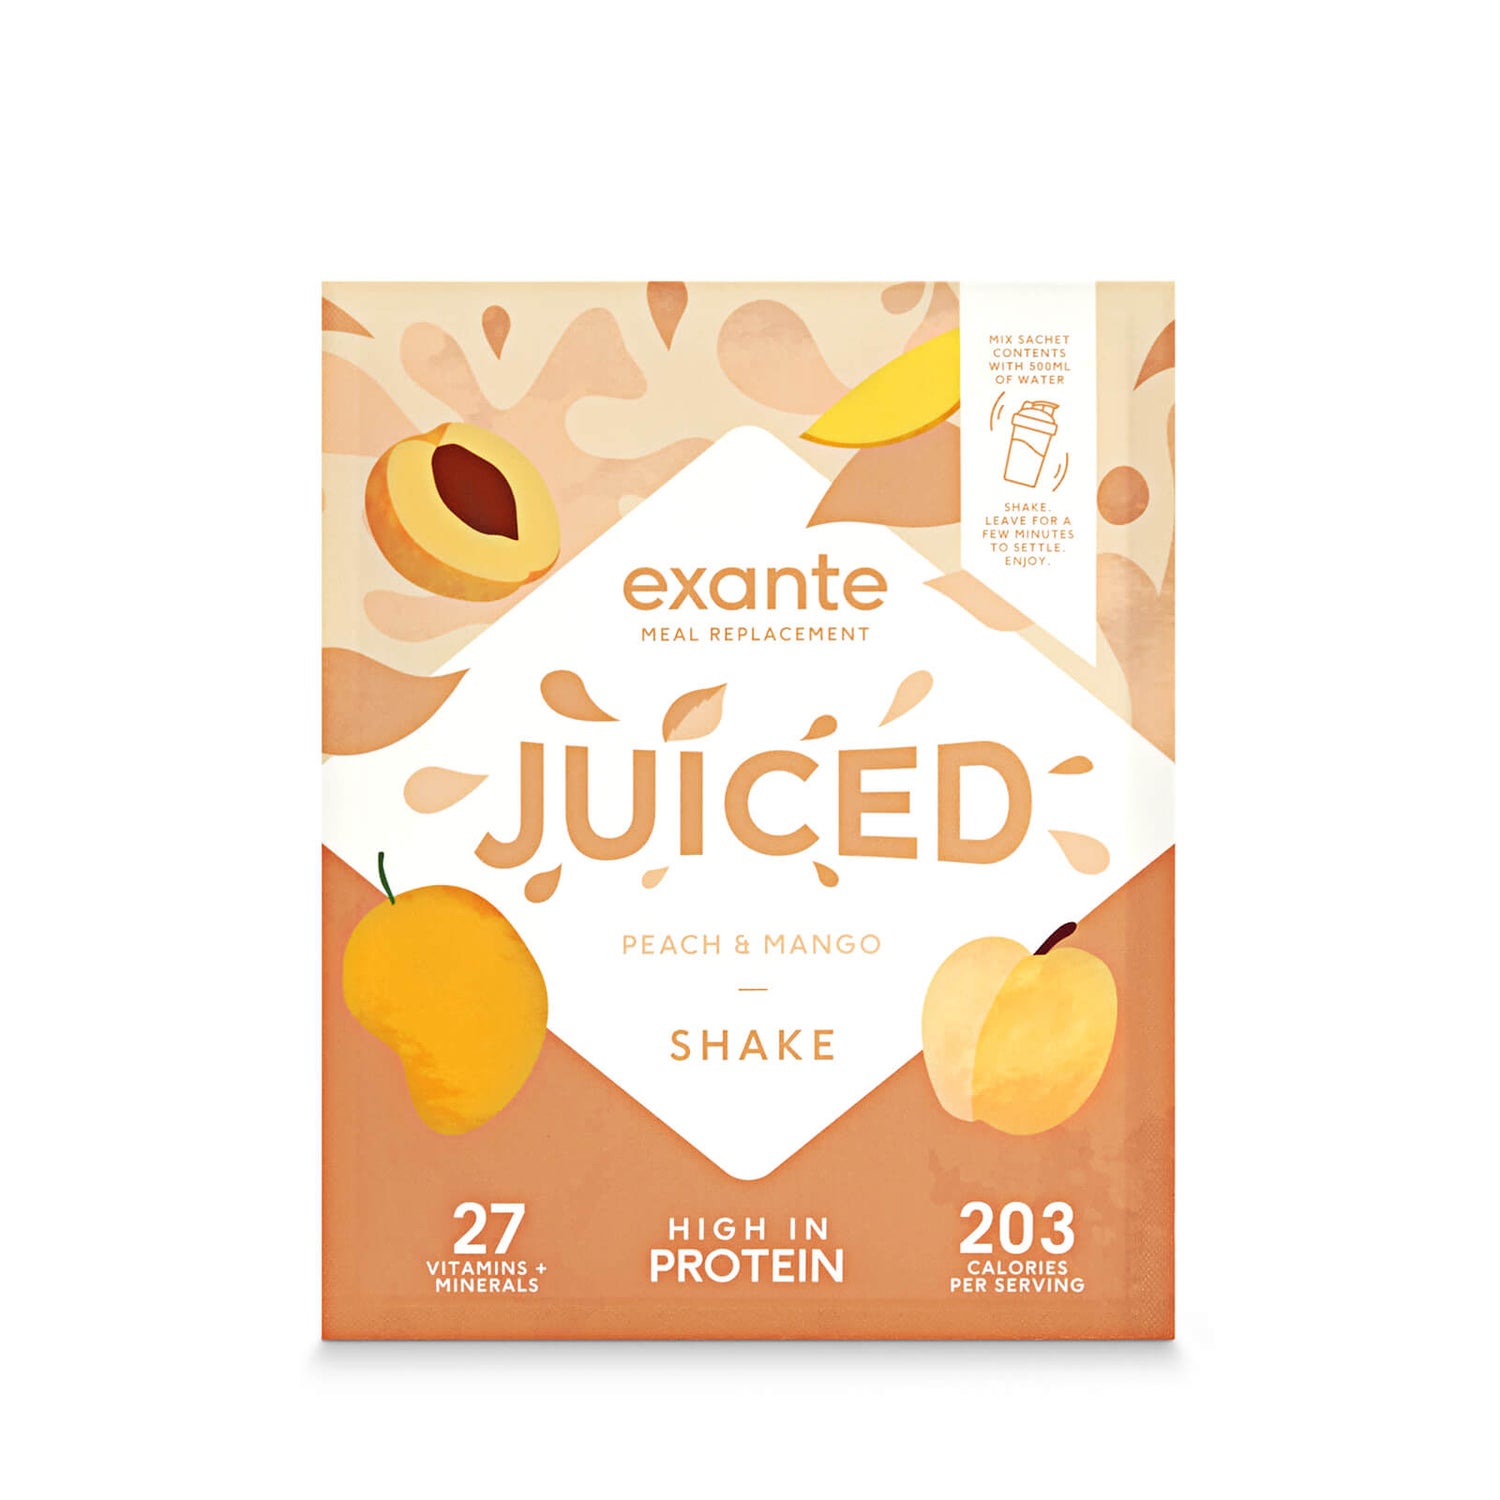 Peach & Mango JUICED Meal Replacement Shake